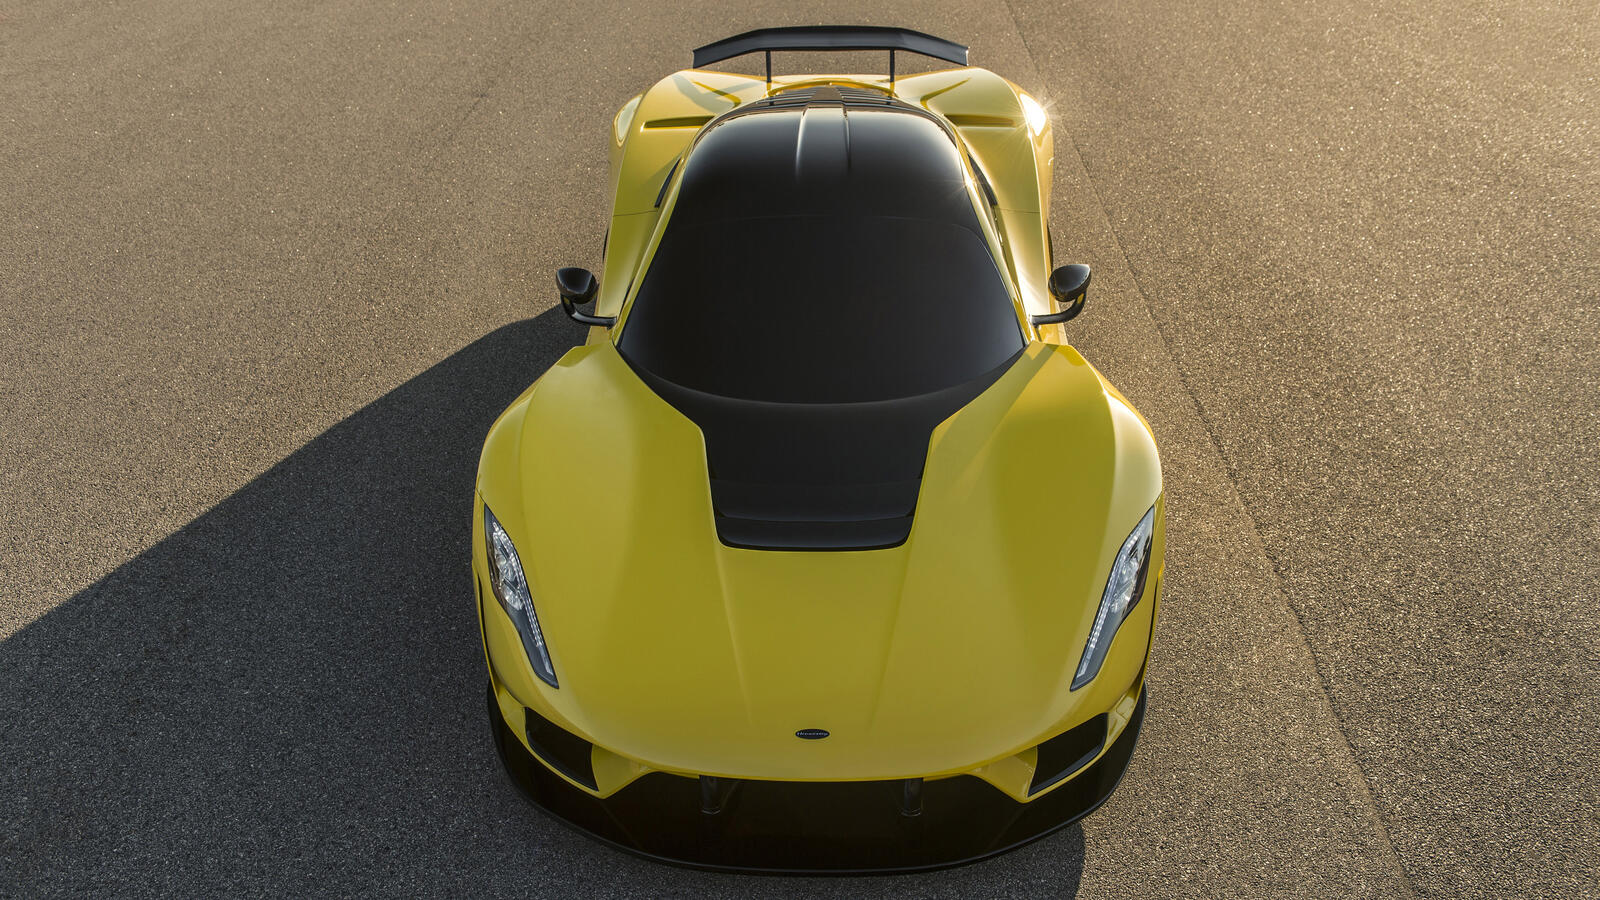 Wallpapers Hennessey sports car yellow on the desktop